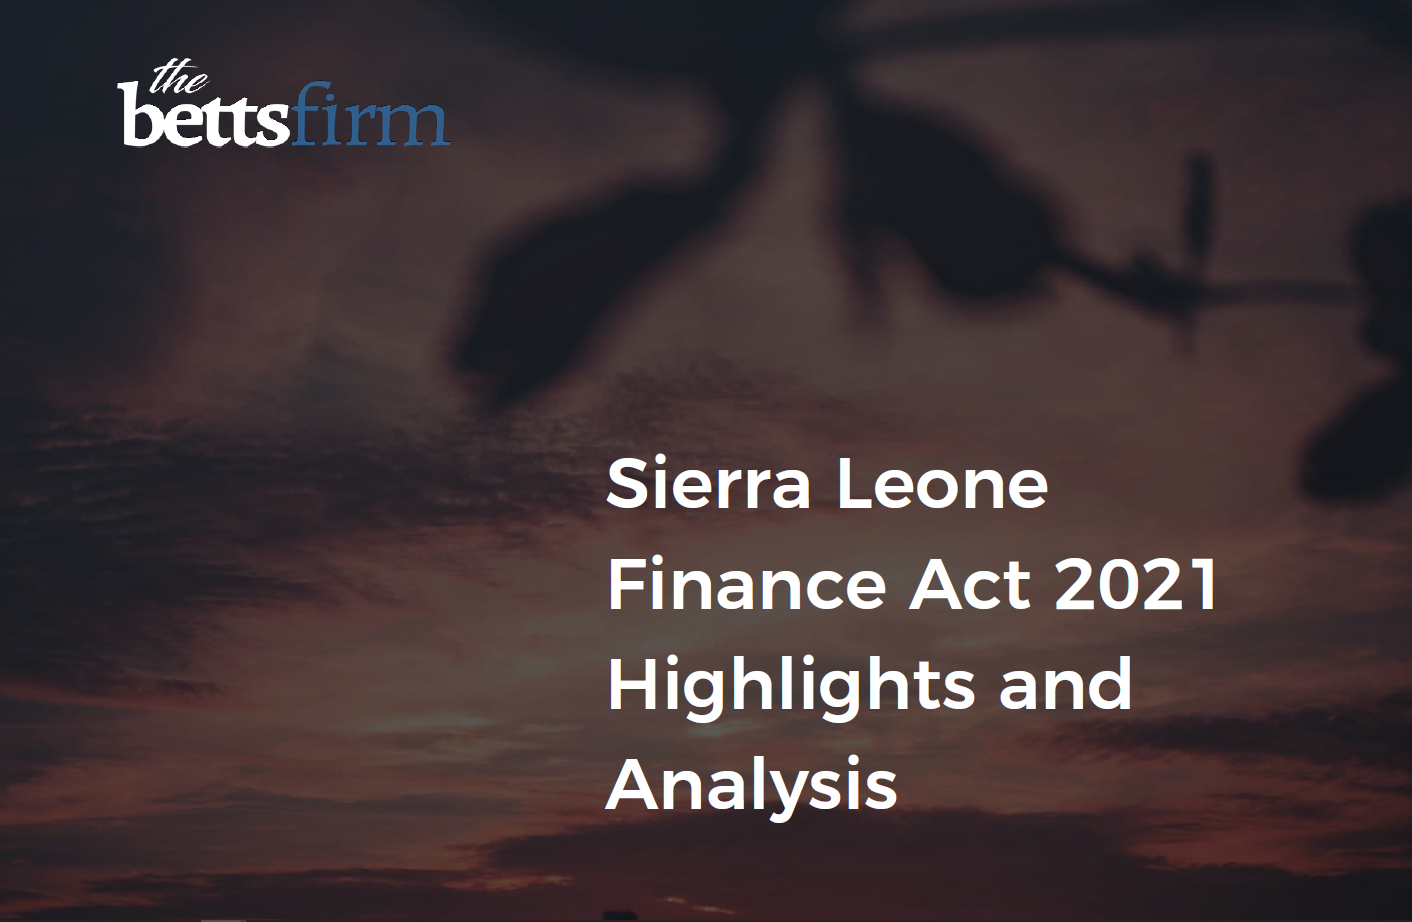 Sierra Leone Finance Act 2021 Highlights and Analysis